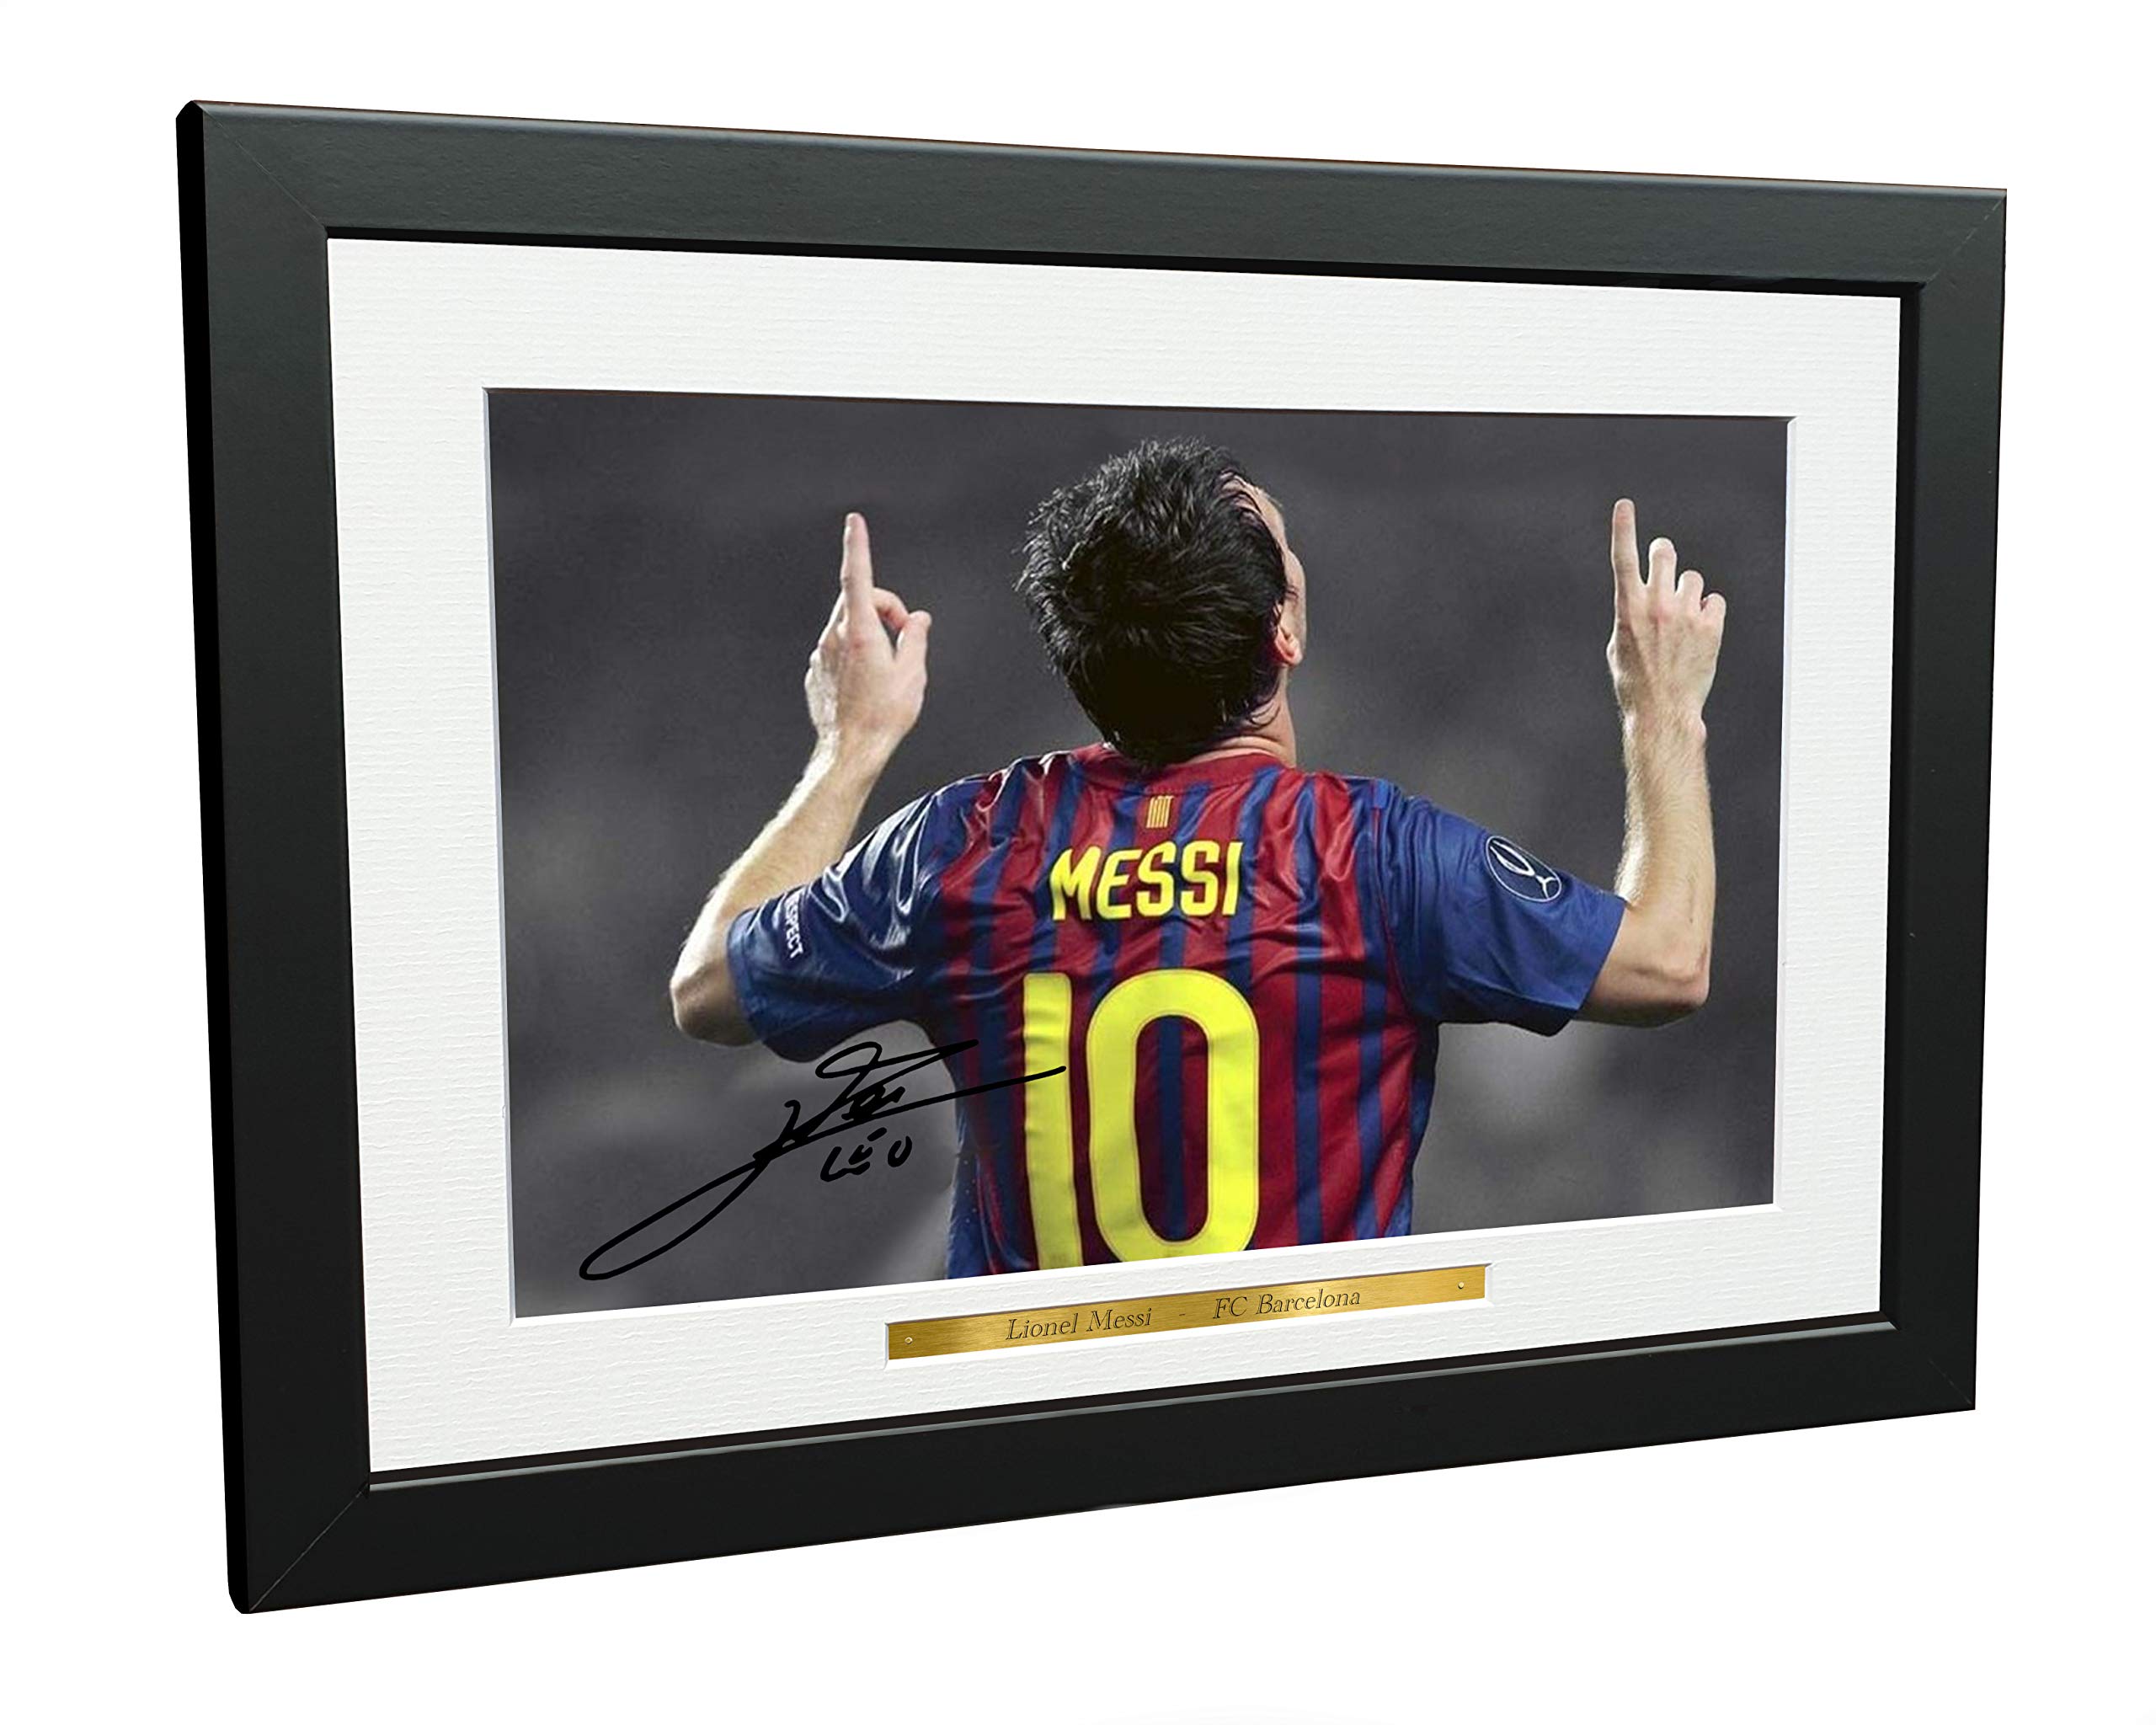 Signed 12x8 Black Soccer Lional Messi Barcelona Autographed Photo Photograph Football Picture Frame Gift A4